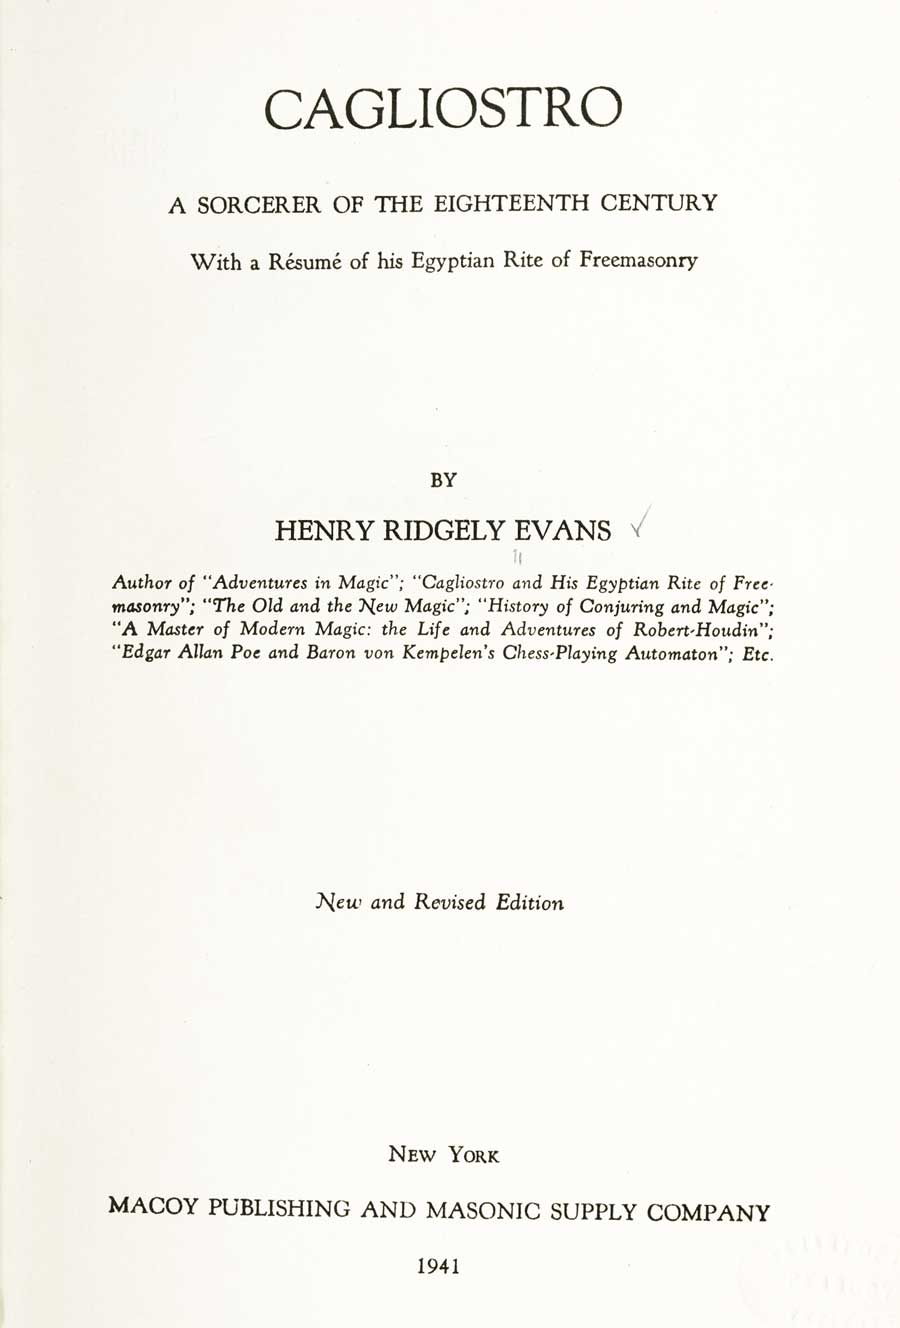 Title page from Henry Ridgeley Evans, Cagliostro